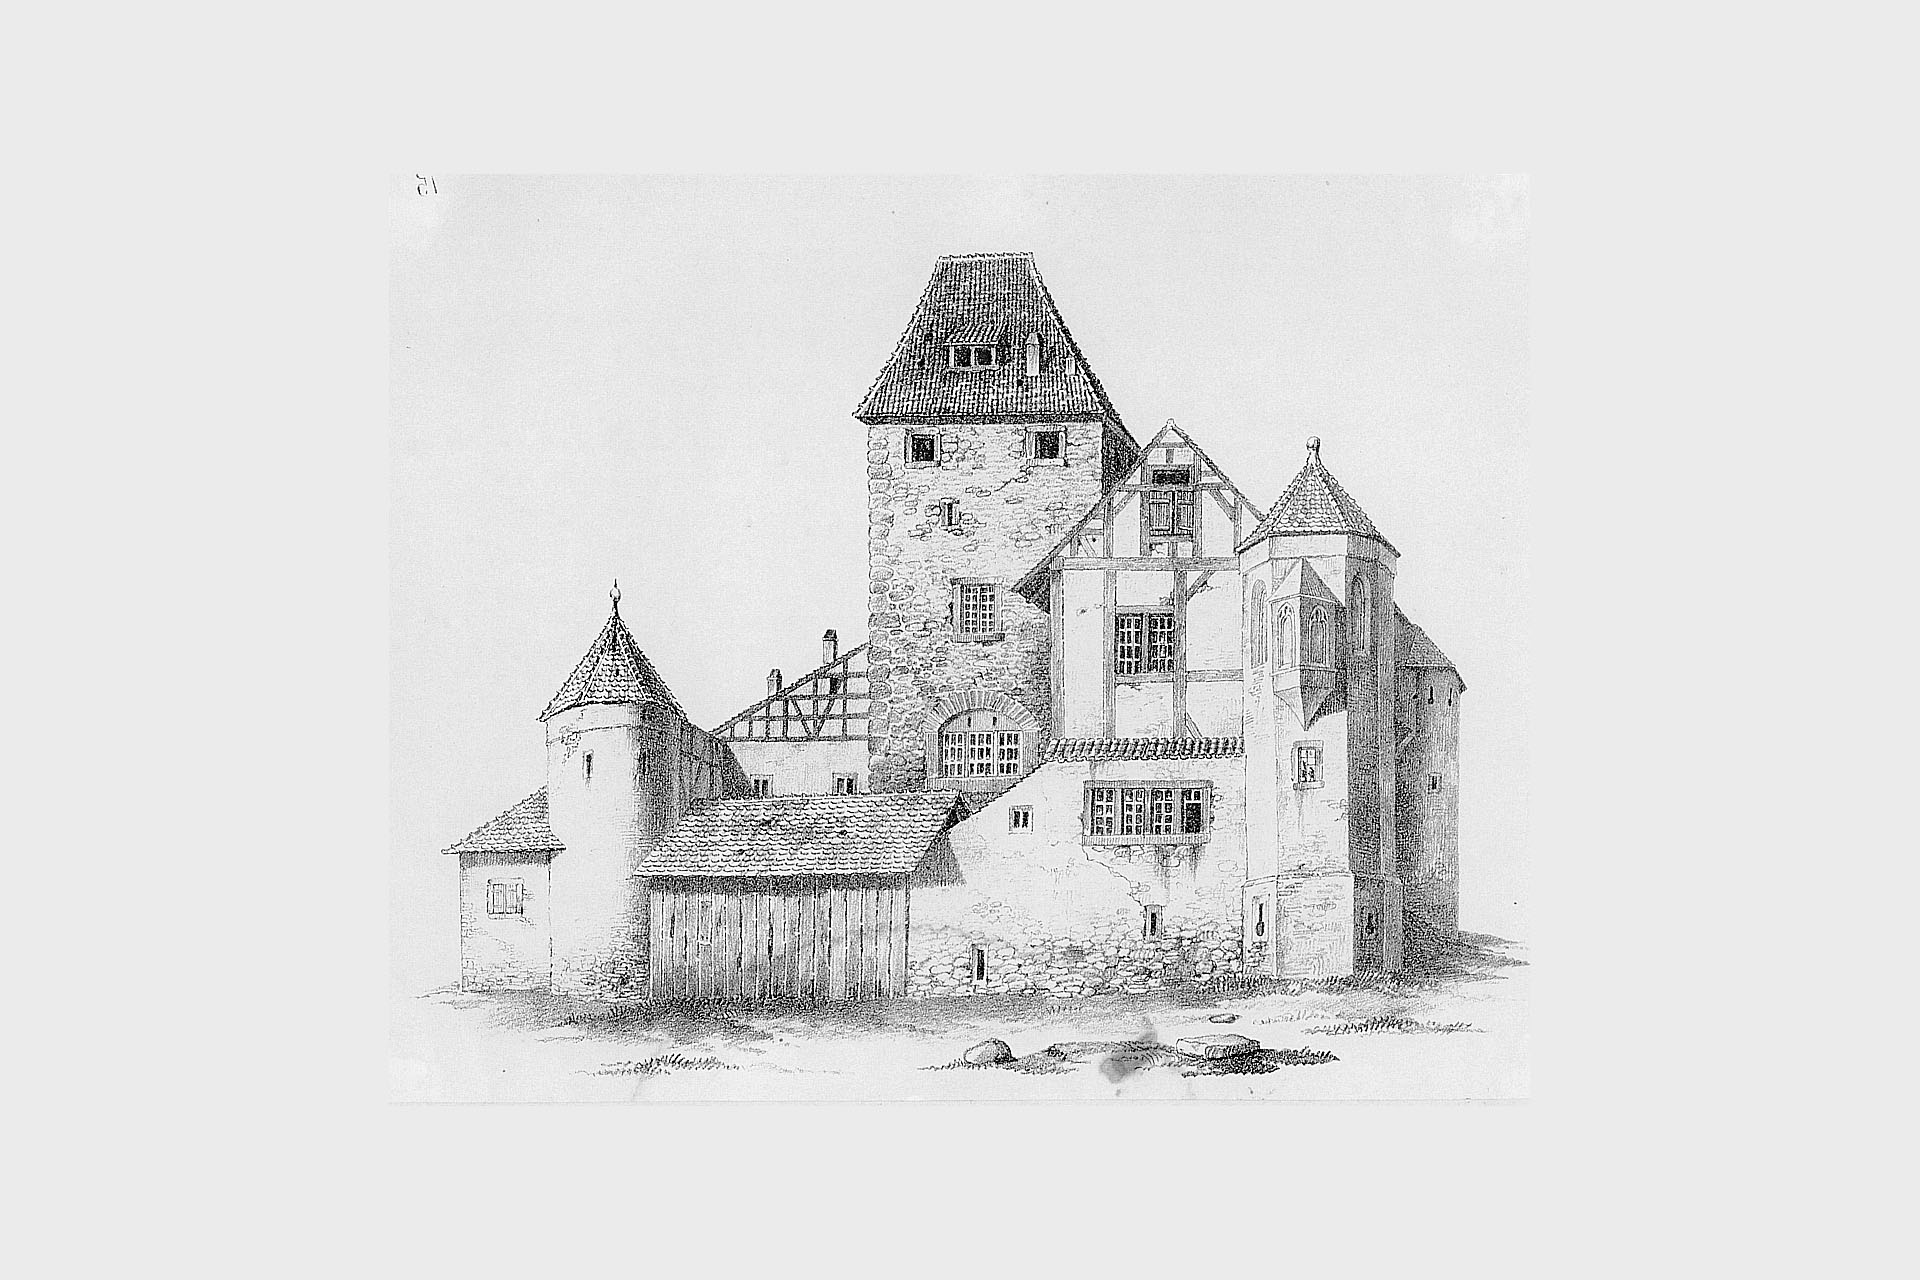 Palace Hegi,drawing by Ludwig Schulthess